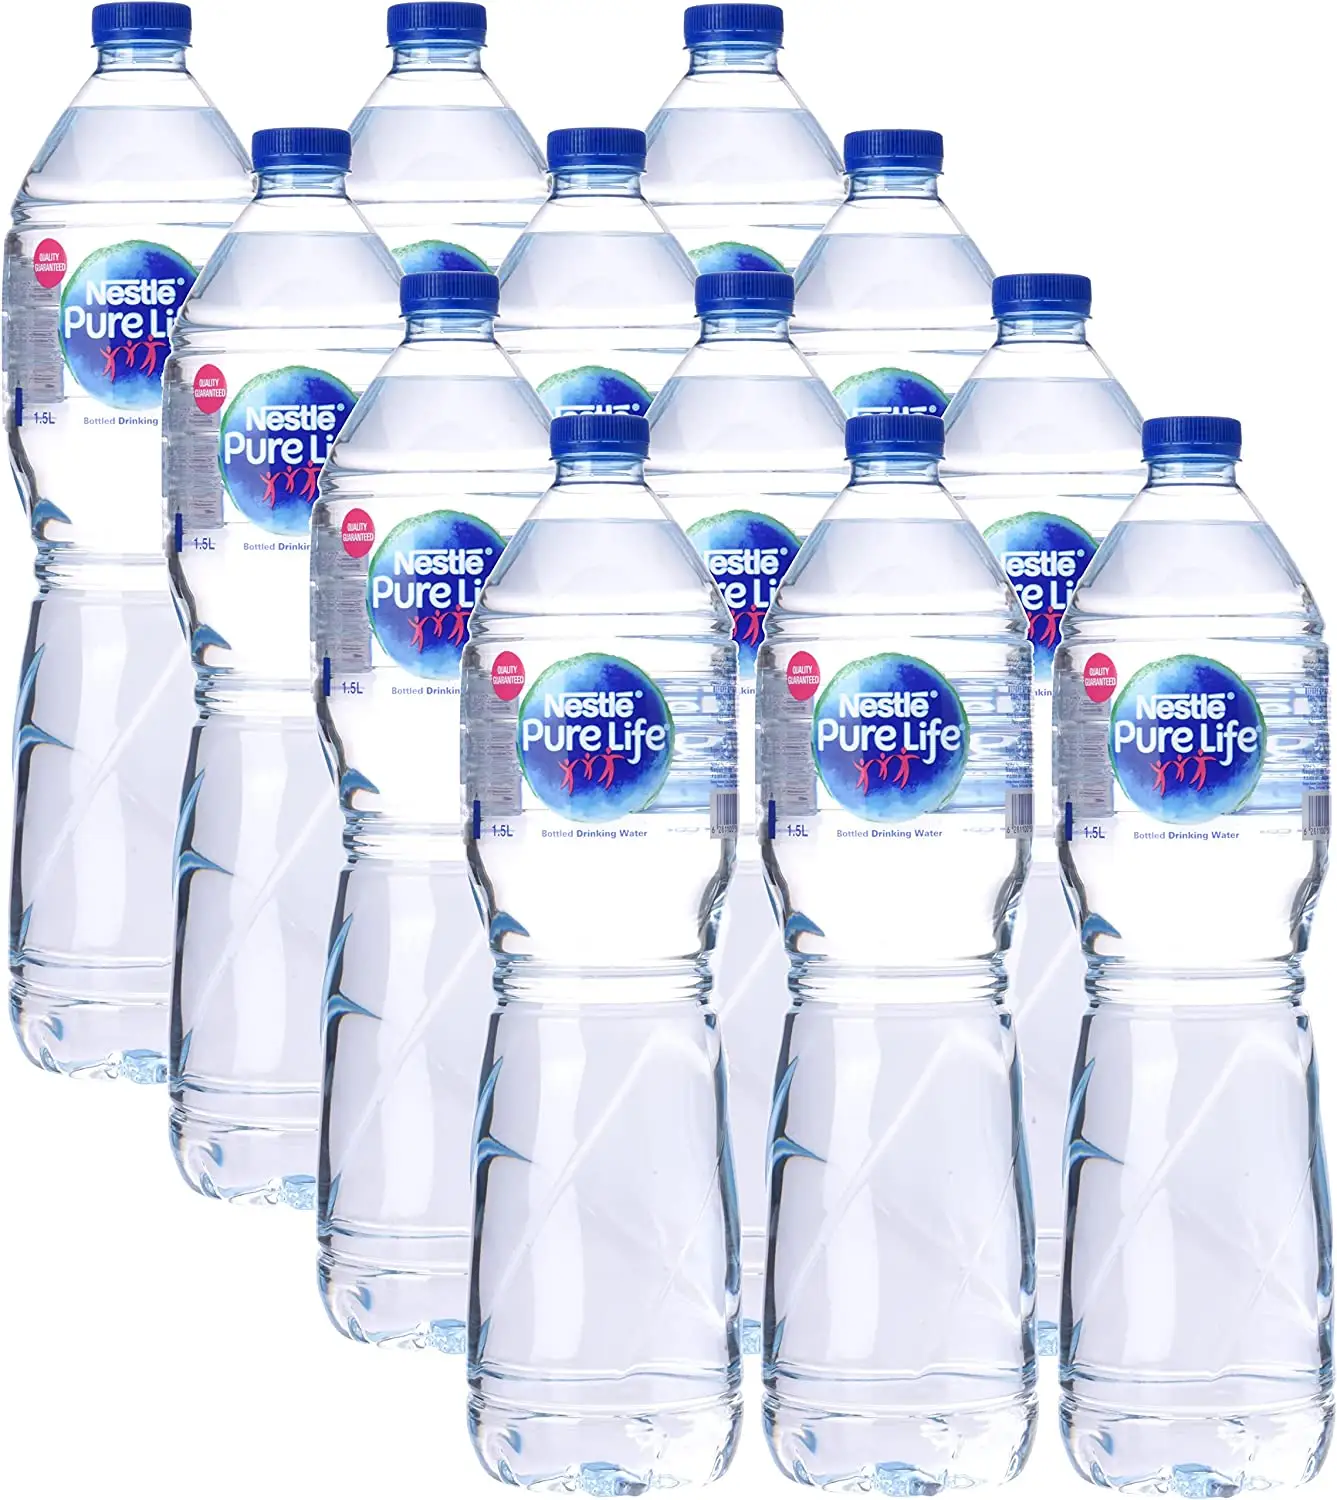 Hot Sale Price Of Nestle- Pure Life Bottled Still Drinking Water - 12 x 1.5 Ltr Bolttes For Sale